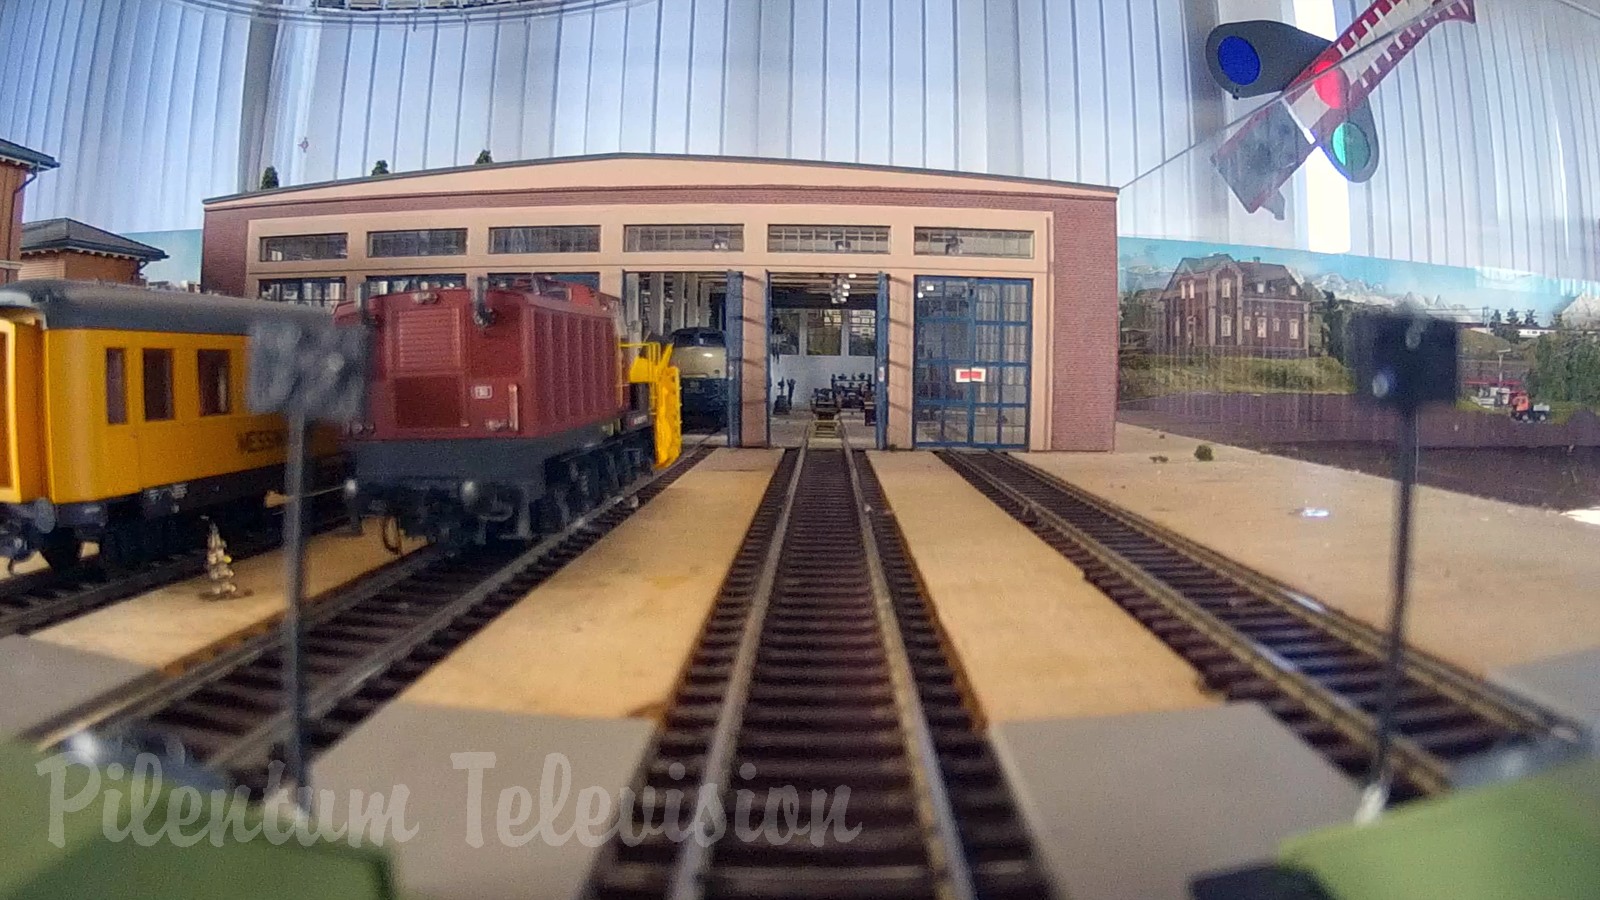 Railroad and Railway Operations in HO Scale: Cab Ride entering the Locomotive Depot or Engine Shed